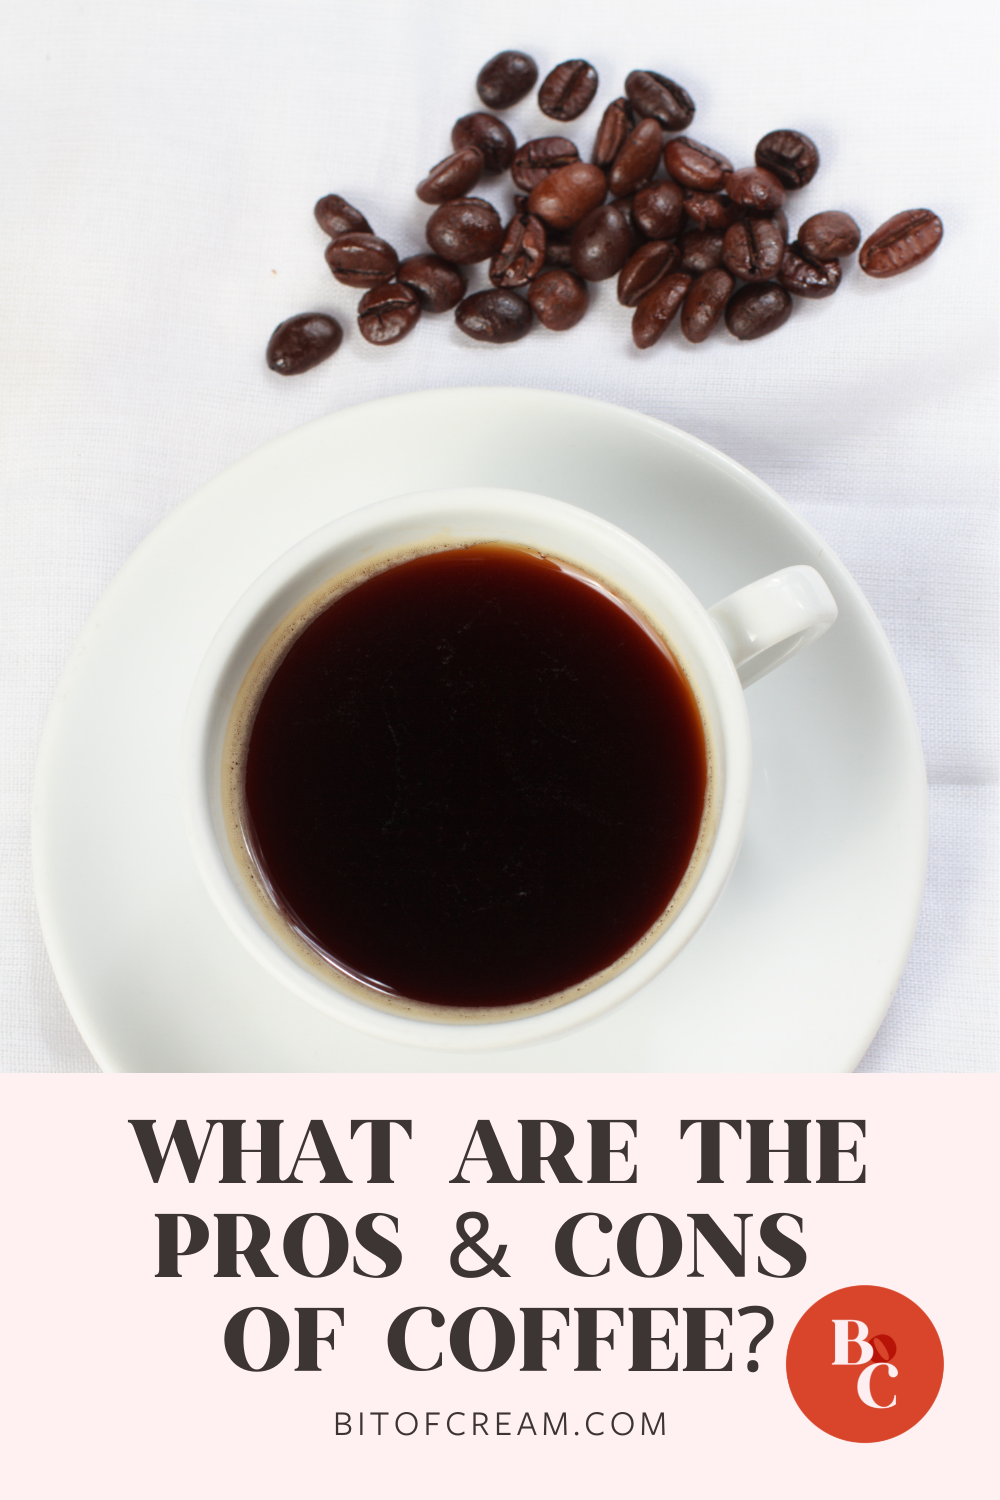 What are the pros and cons of coffee